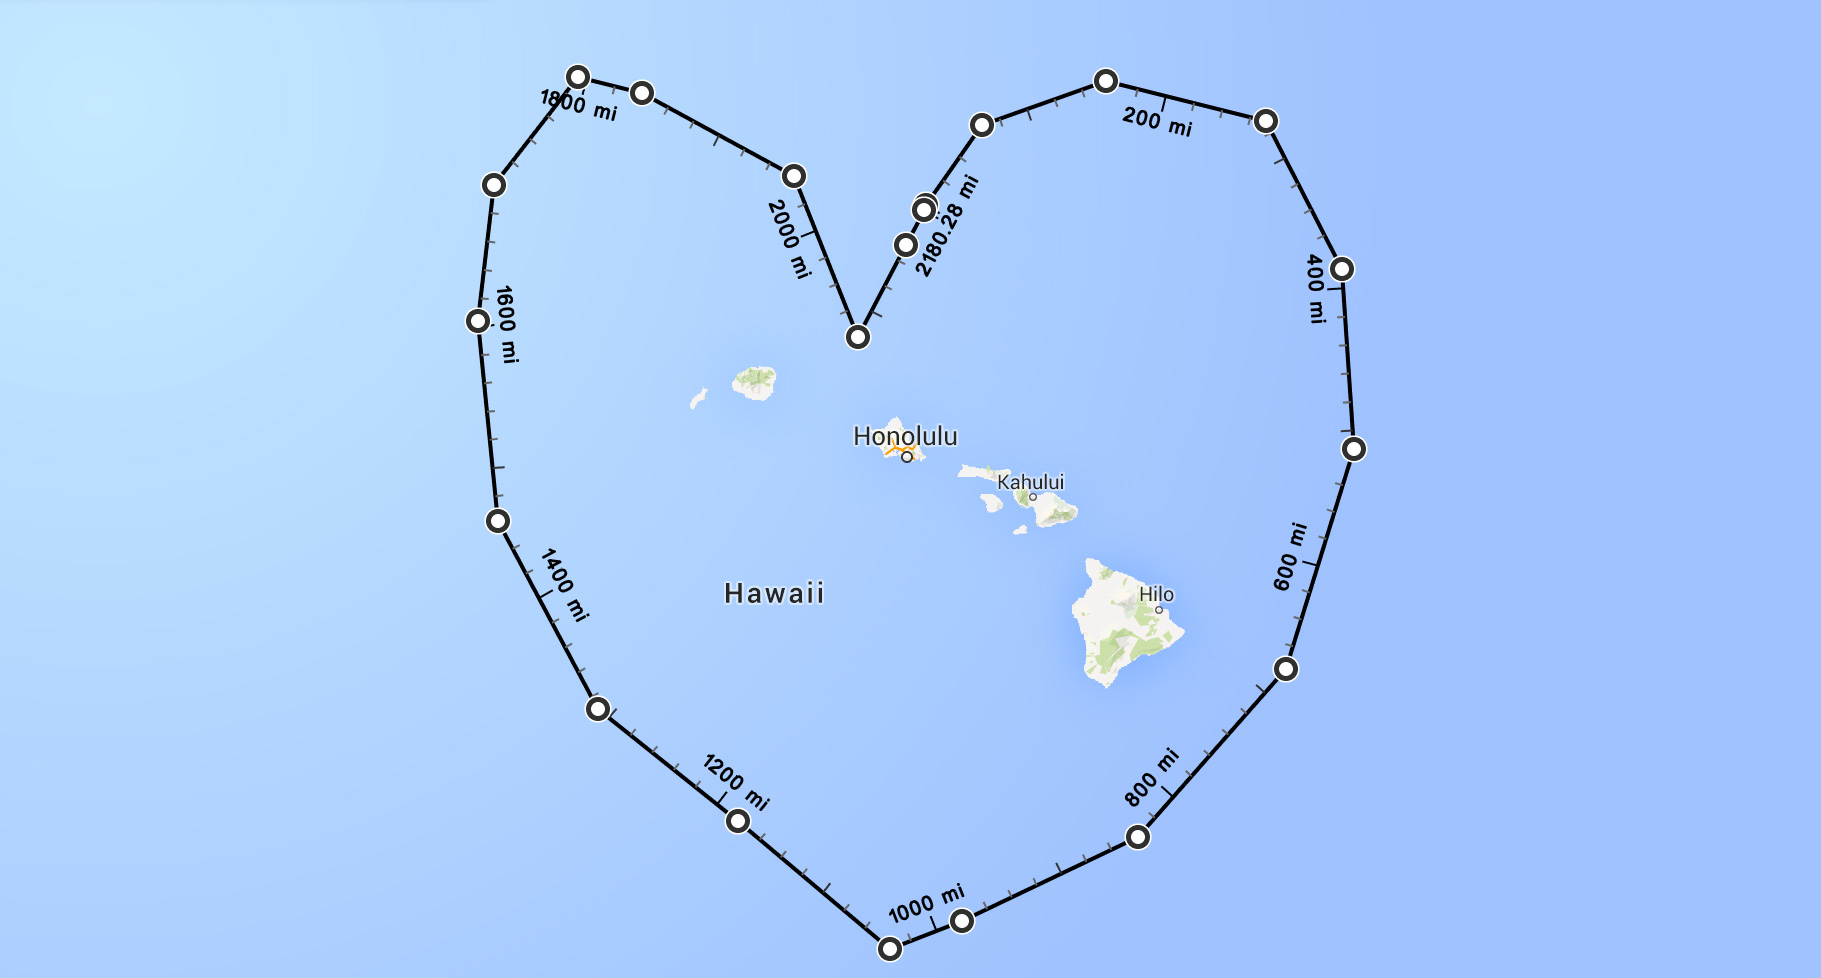 Google Maps' measurement tool shows how far you have to travel to demonstrate your love for Hawaii.